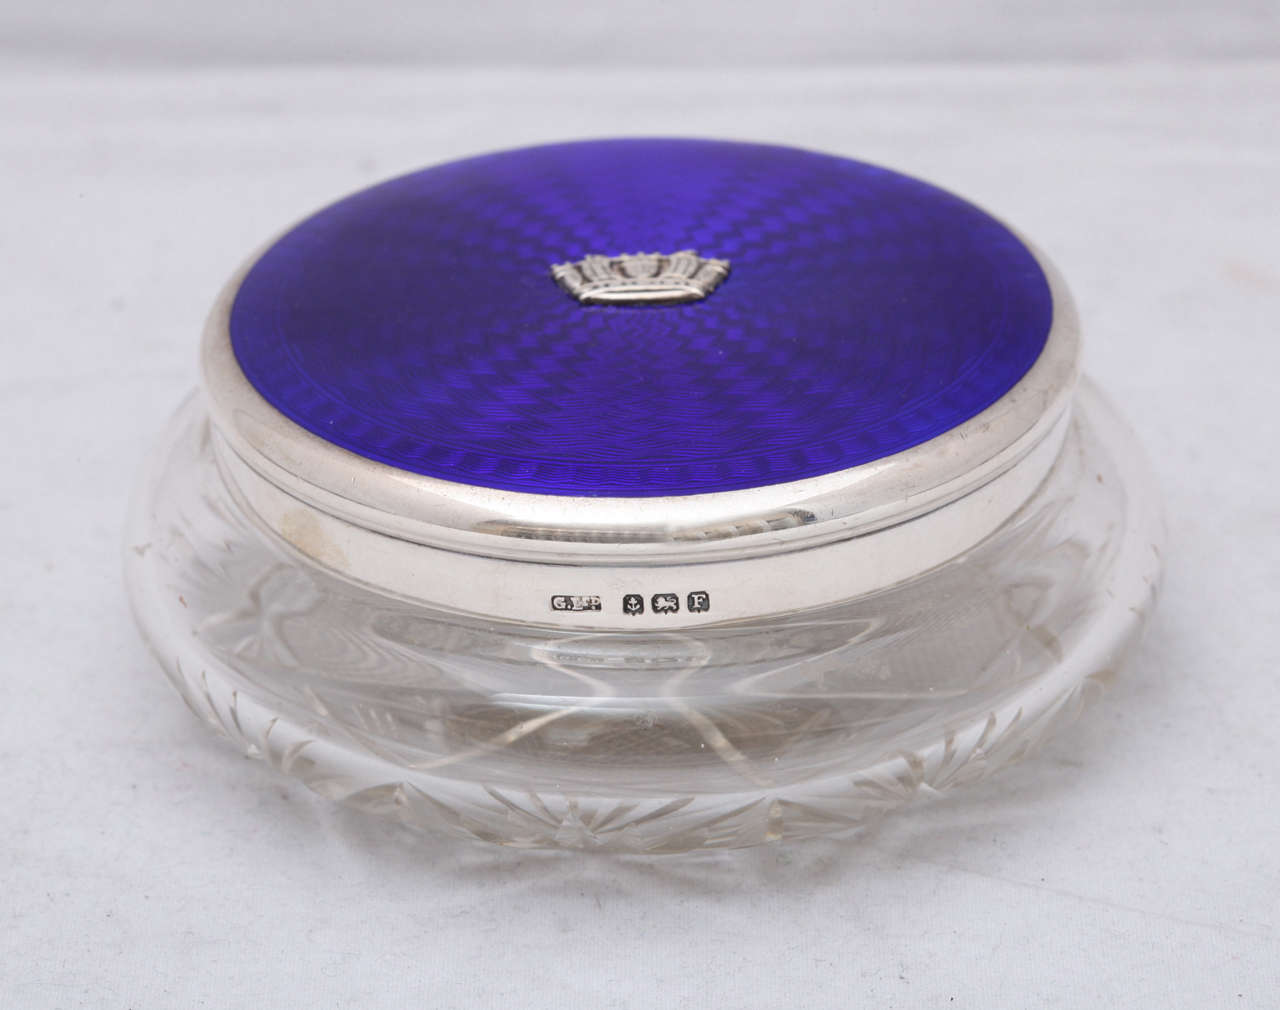 Beautiful, Art Deco, sterling silver, deep cobalt blue guilloche enamel and crystal powder jar with applied sterling silver crown on lid, Birmingham, England, 1930, Gieves, Ltd. - maker; Retailed at Gieves, Ltd. on Old Bond Street, London. Guilloche